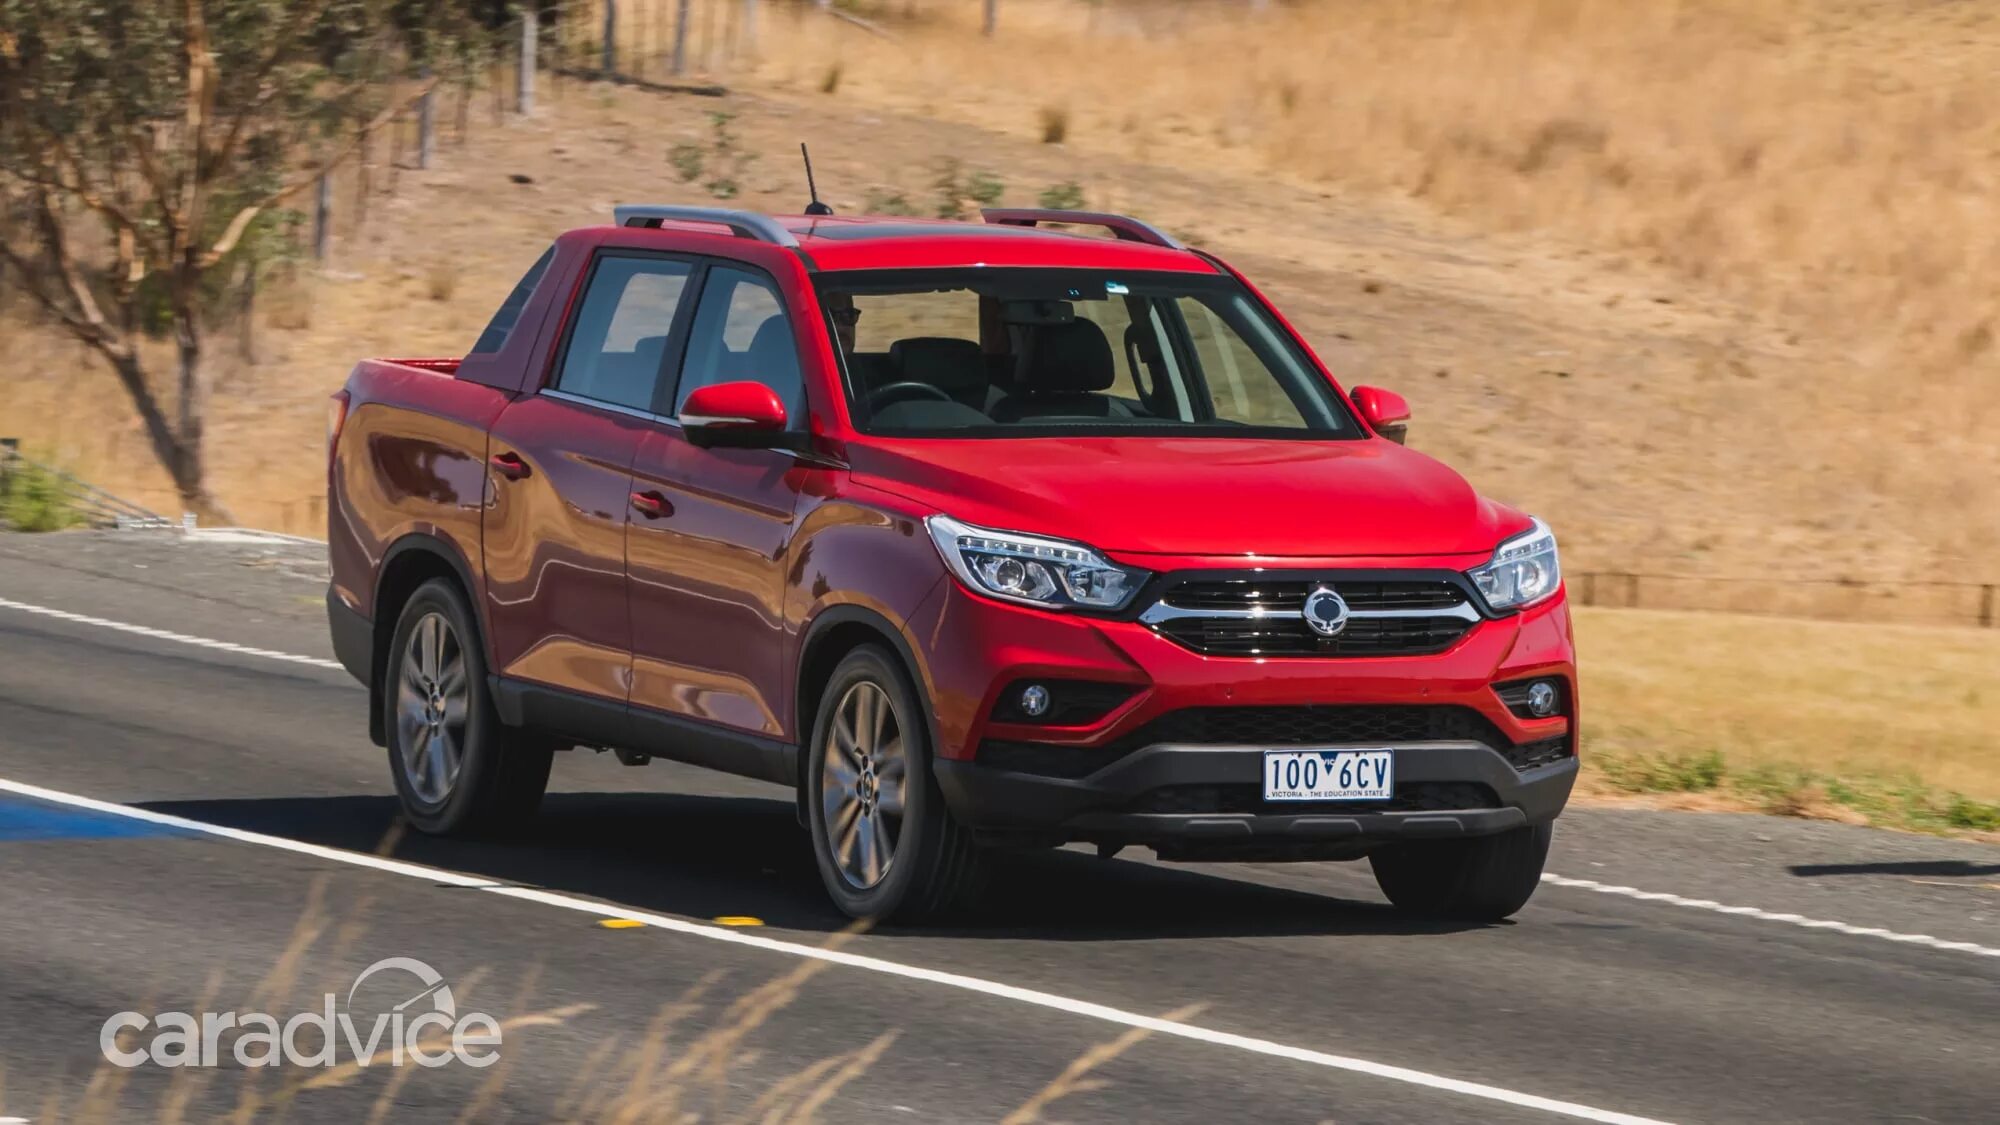 Санг енг 2019. SSANGYONG Musso 2019. SSANGYONG Musso 2022. SSANGYONG Musso 2020. ССАНГЙОНГ 2019.